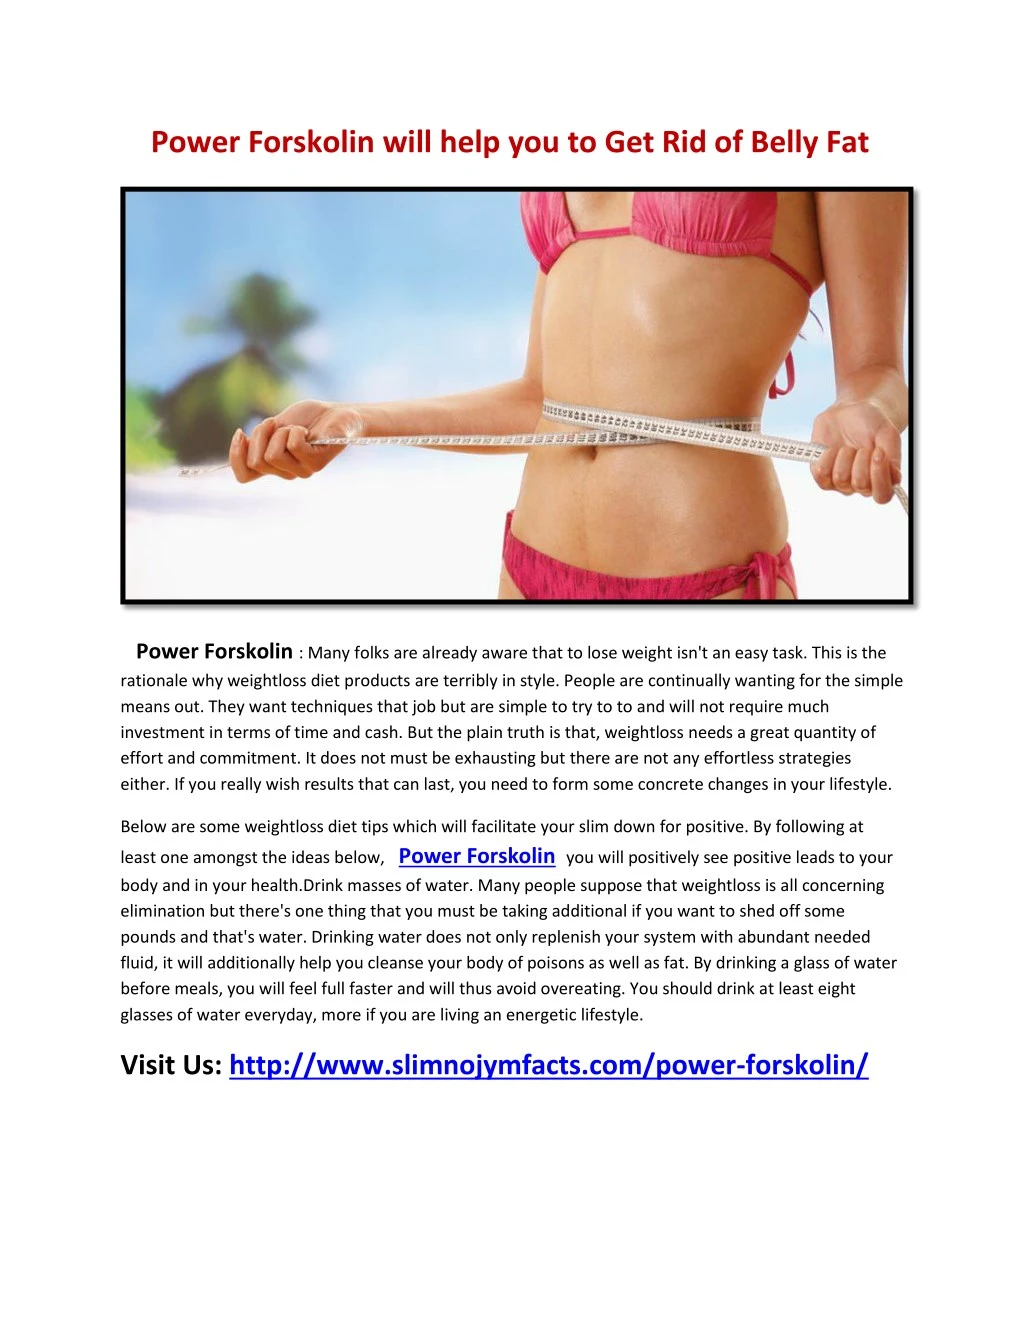 power forskolin will help you to get rid of belly